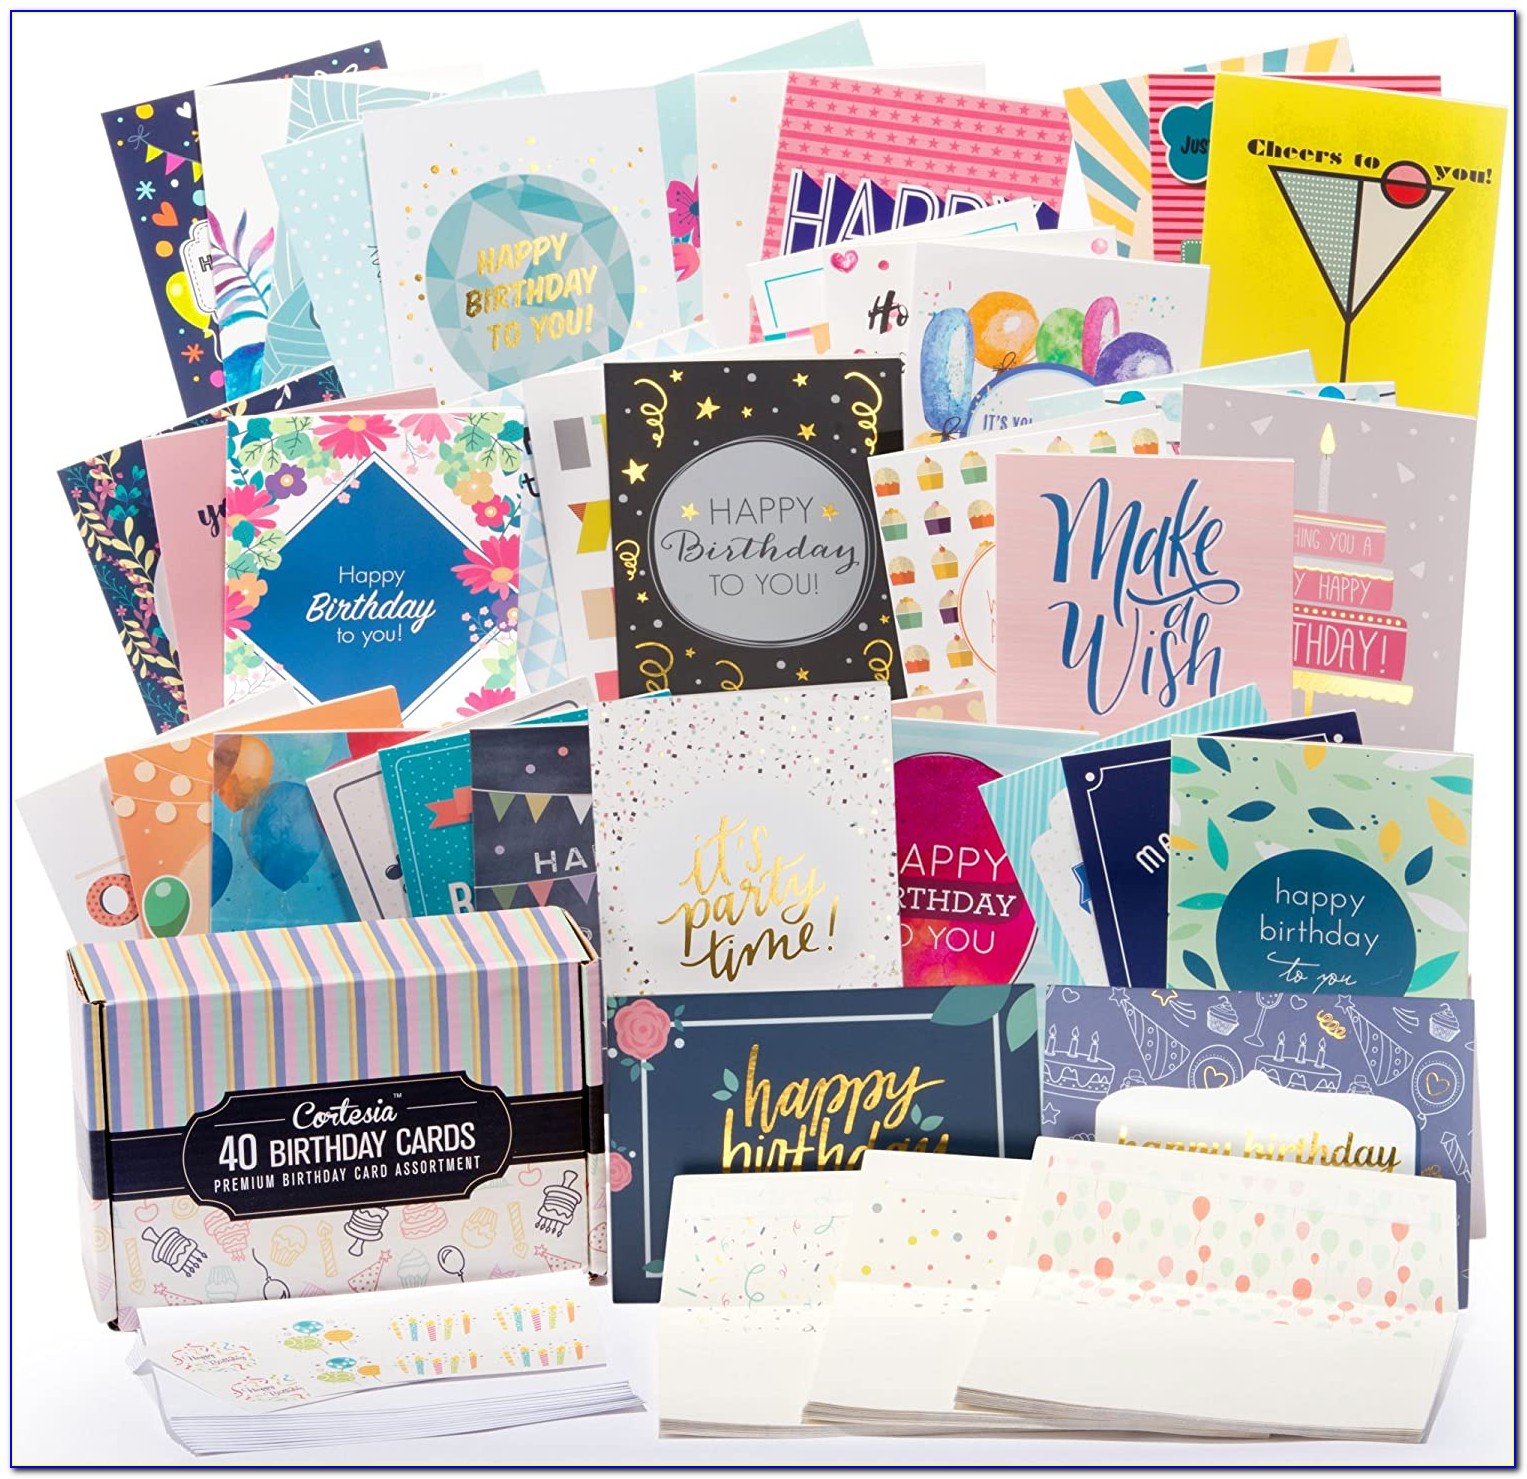 Where Can I Buy A Box Of Assorted Birthday Cards